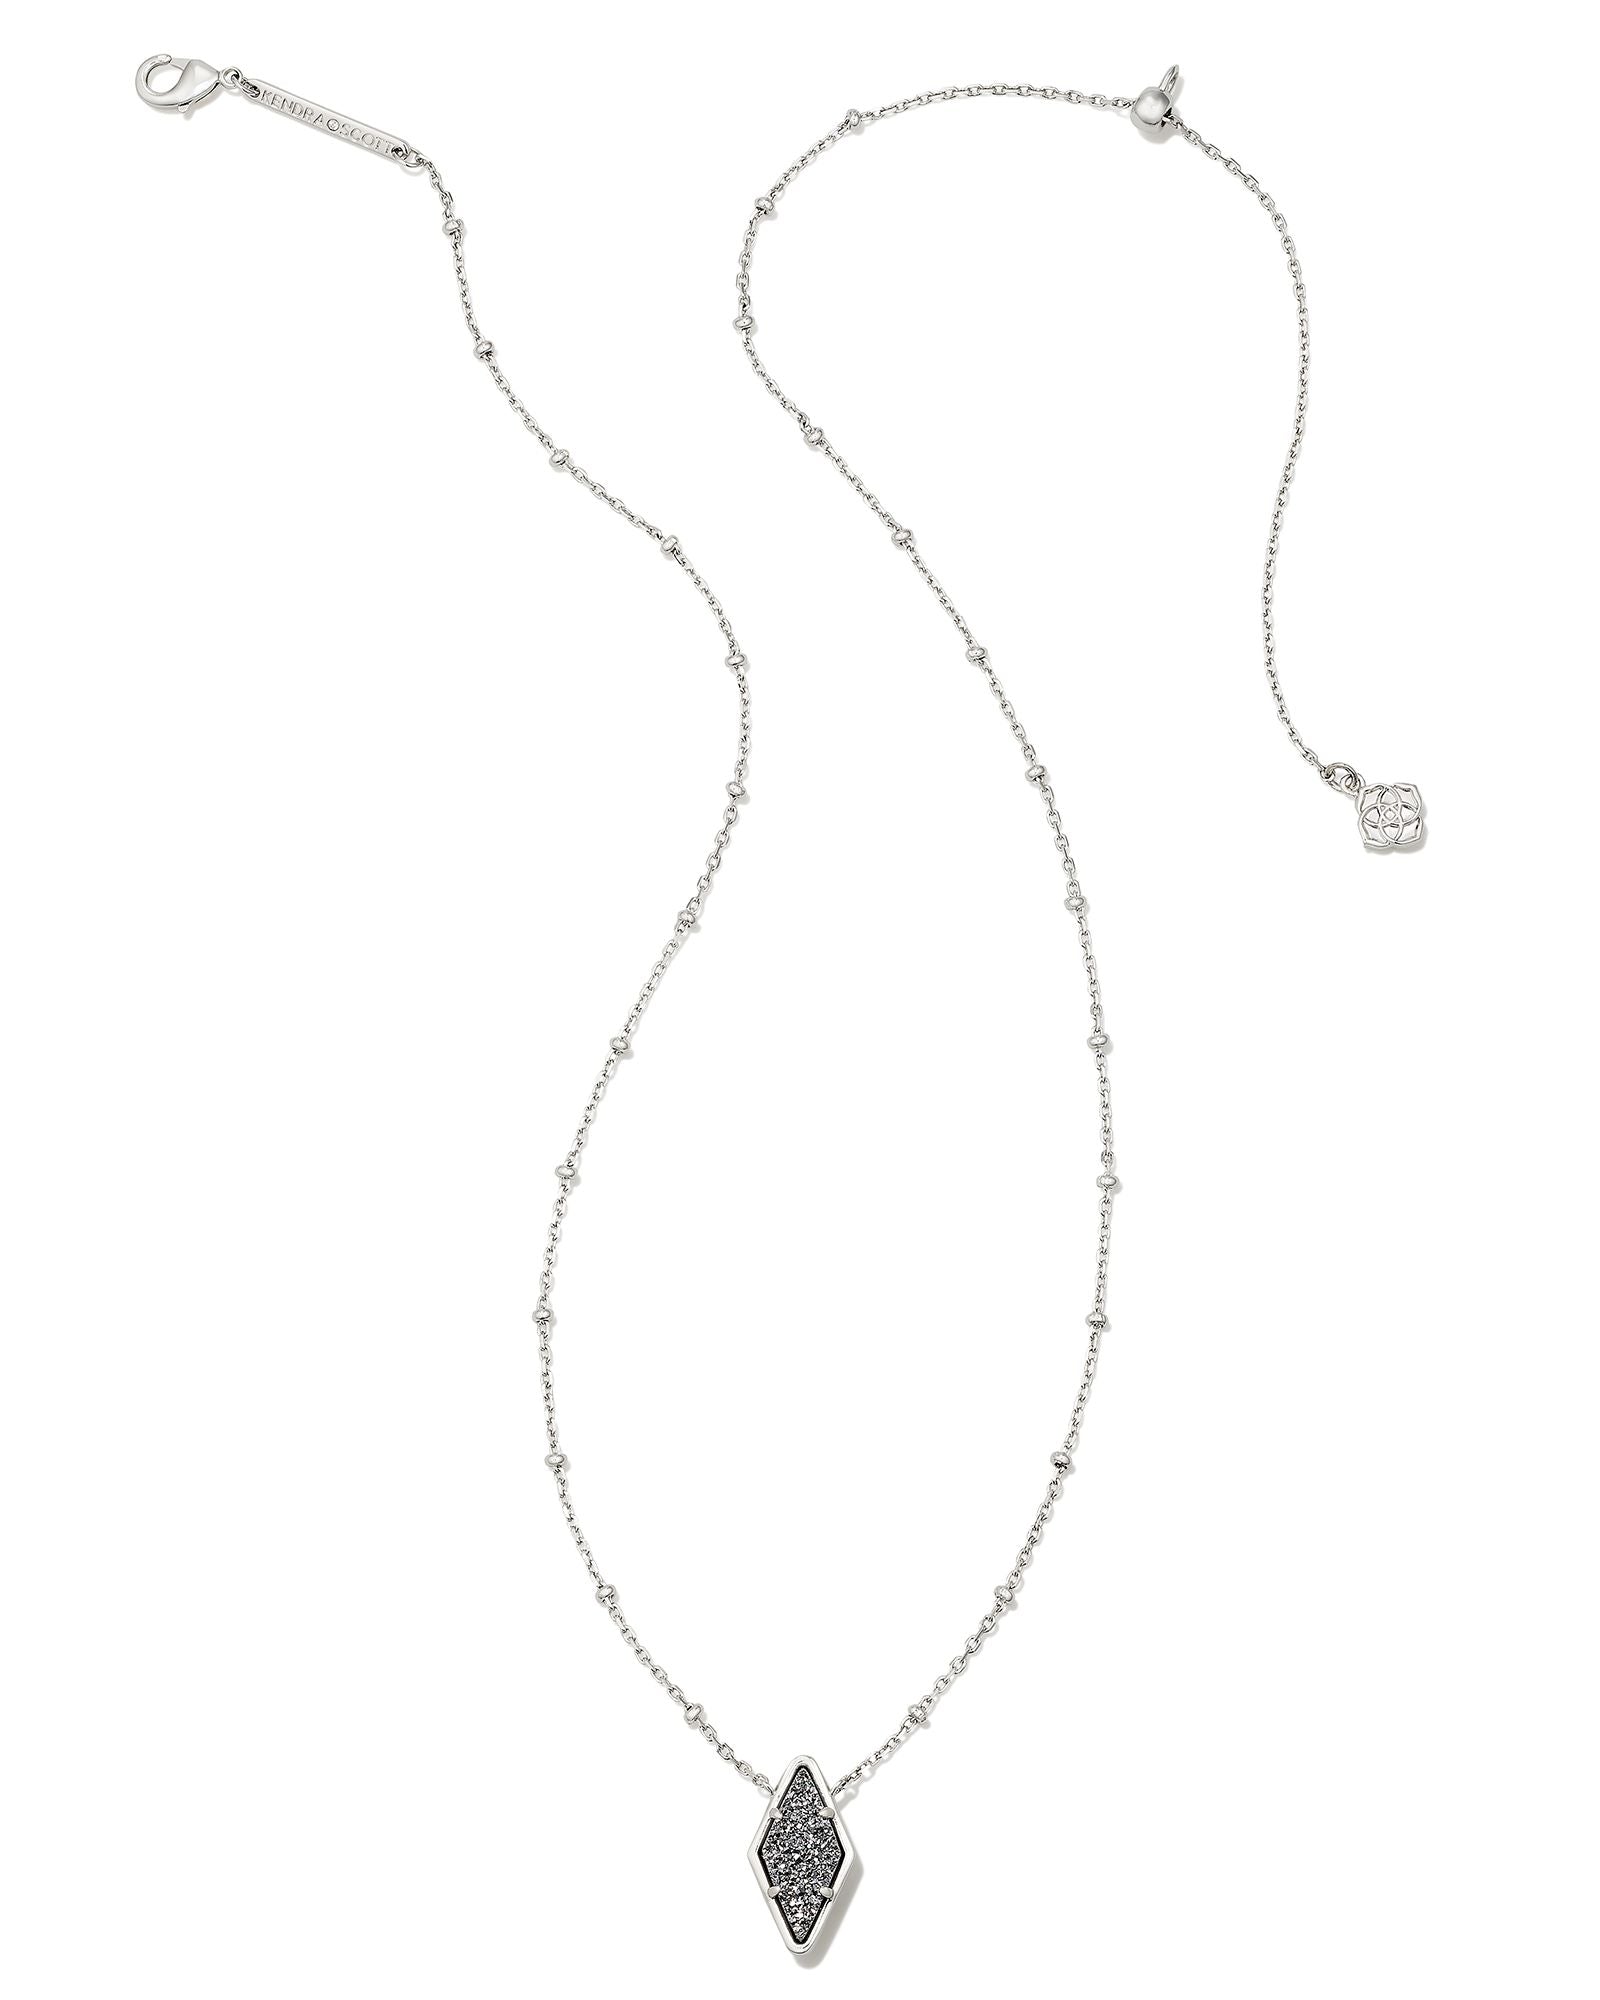 Kendra Scott | Kinsley Silver Short Pendant Necklace in Platinum Drusy - Giddy Up Glamour Boutique